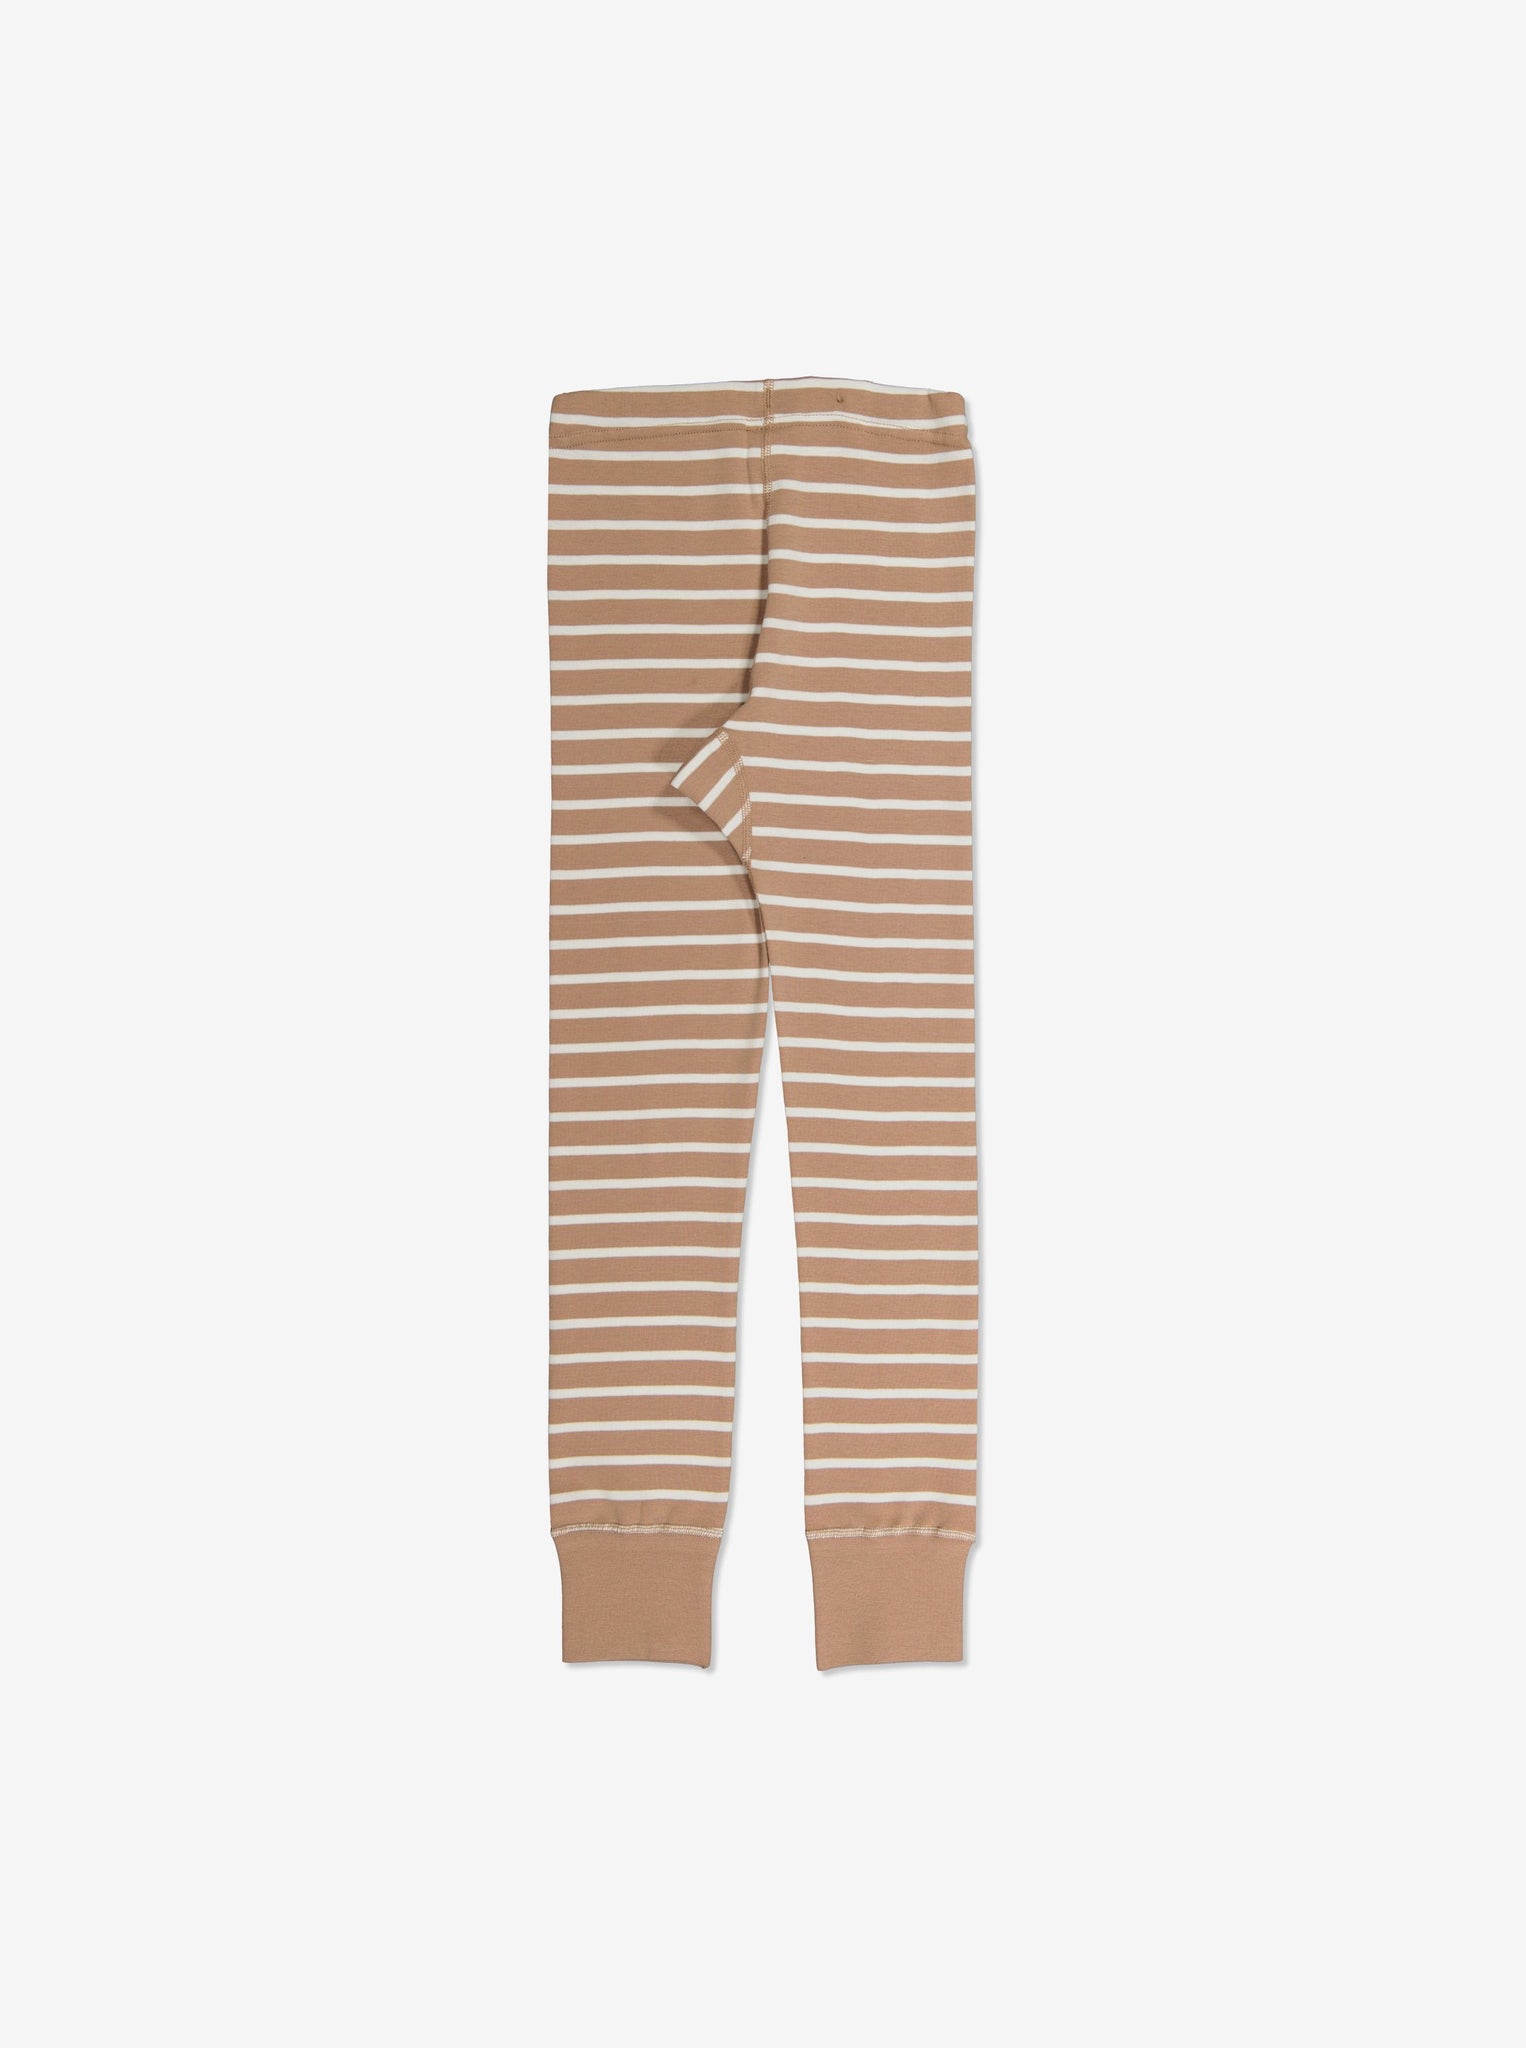  Orgaic Striped Beige Kids Leggings from Polarn O. Pyret Kidswear. Made with 100% organic cotton.